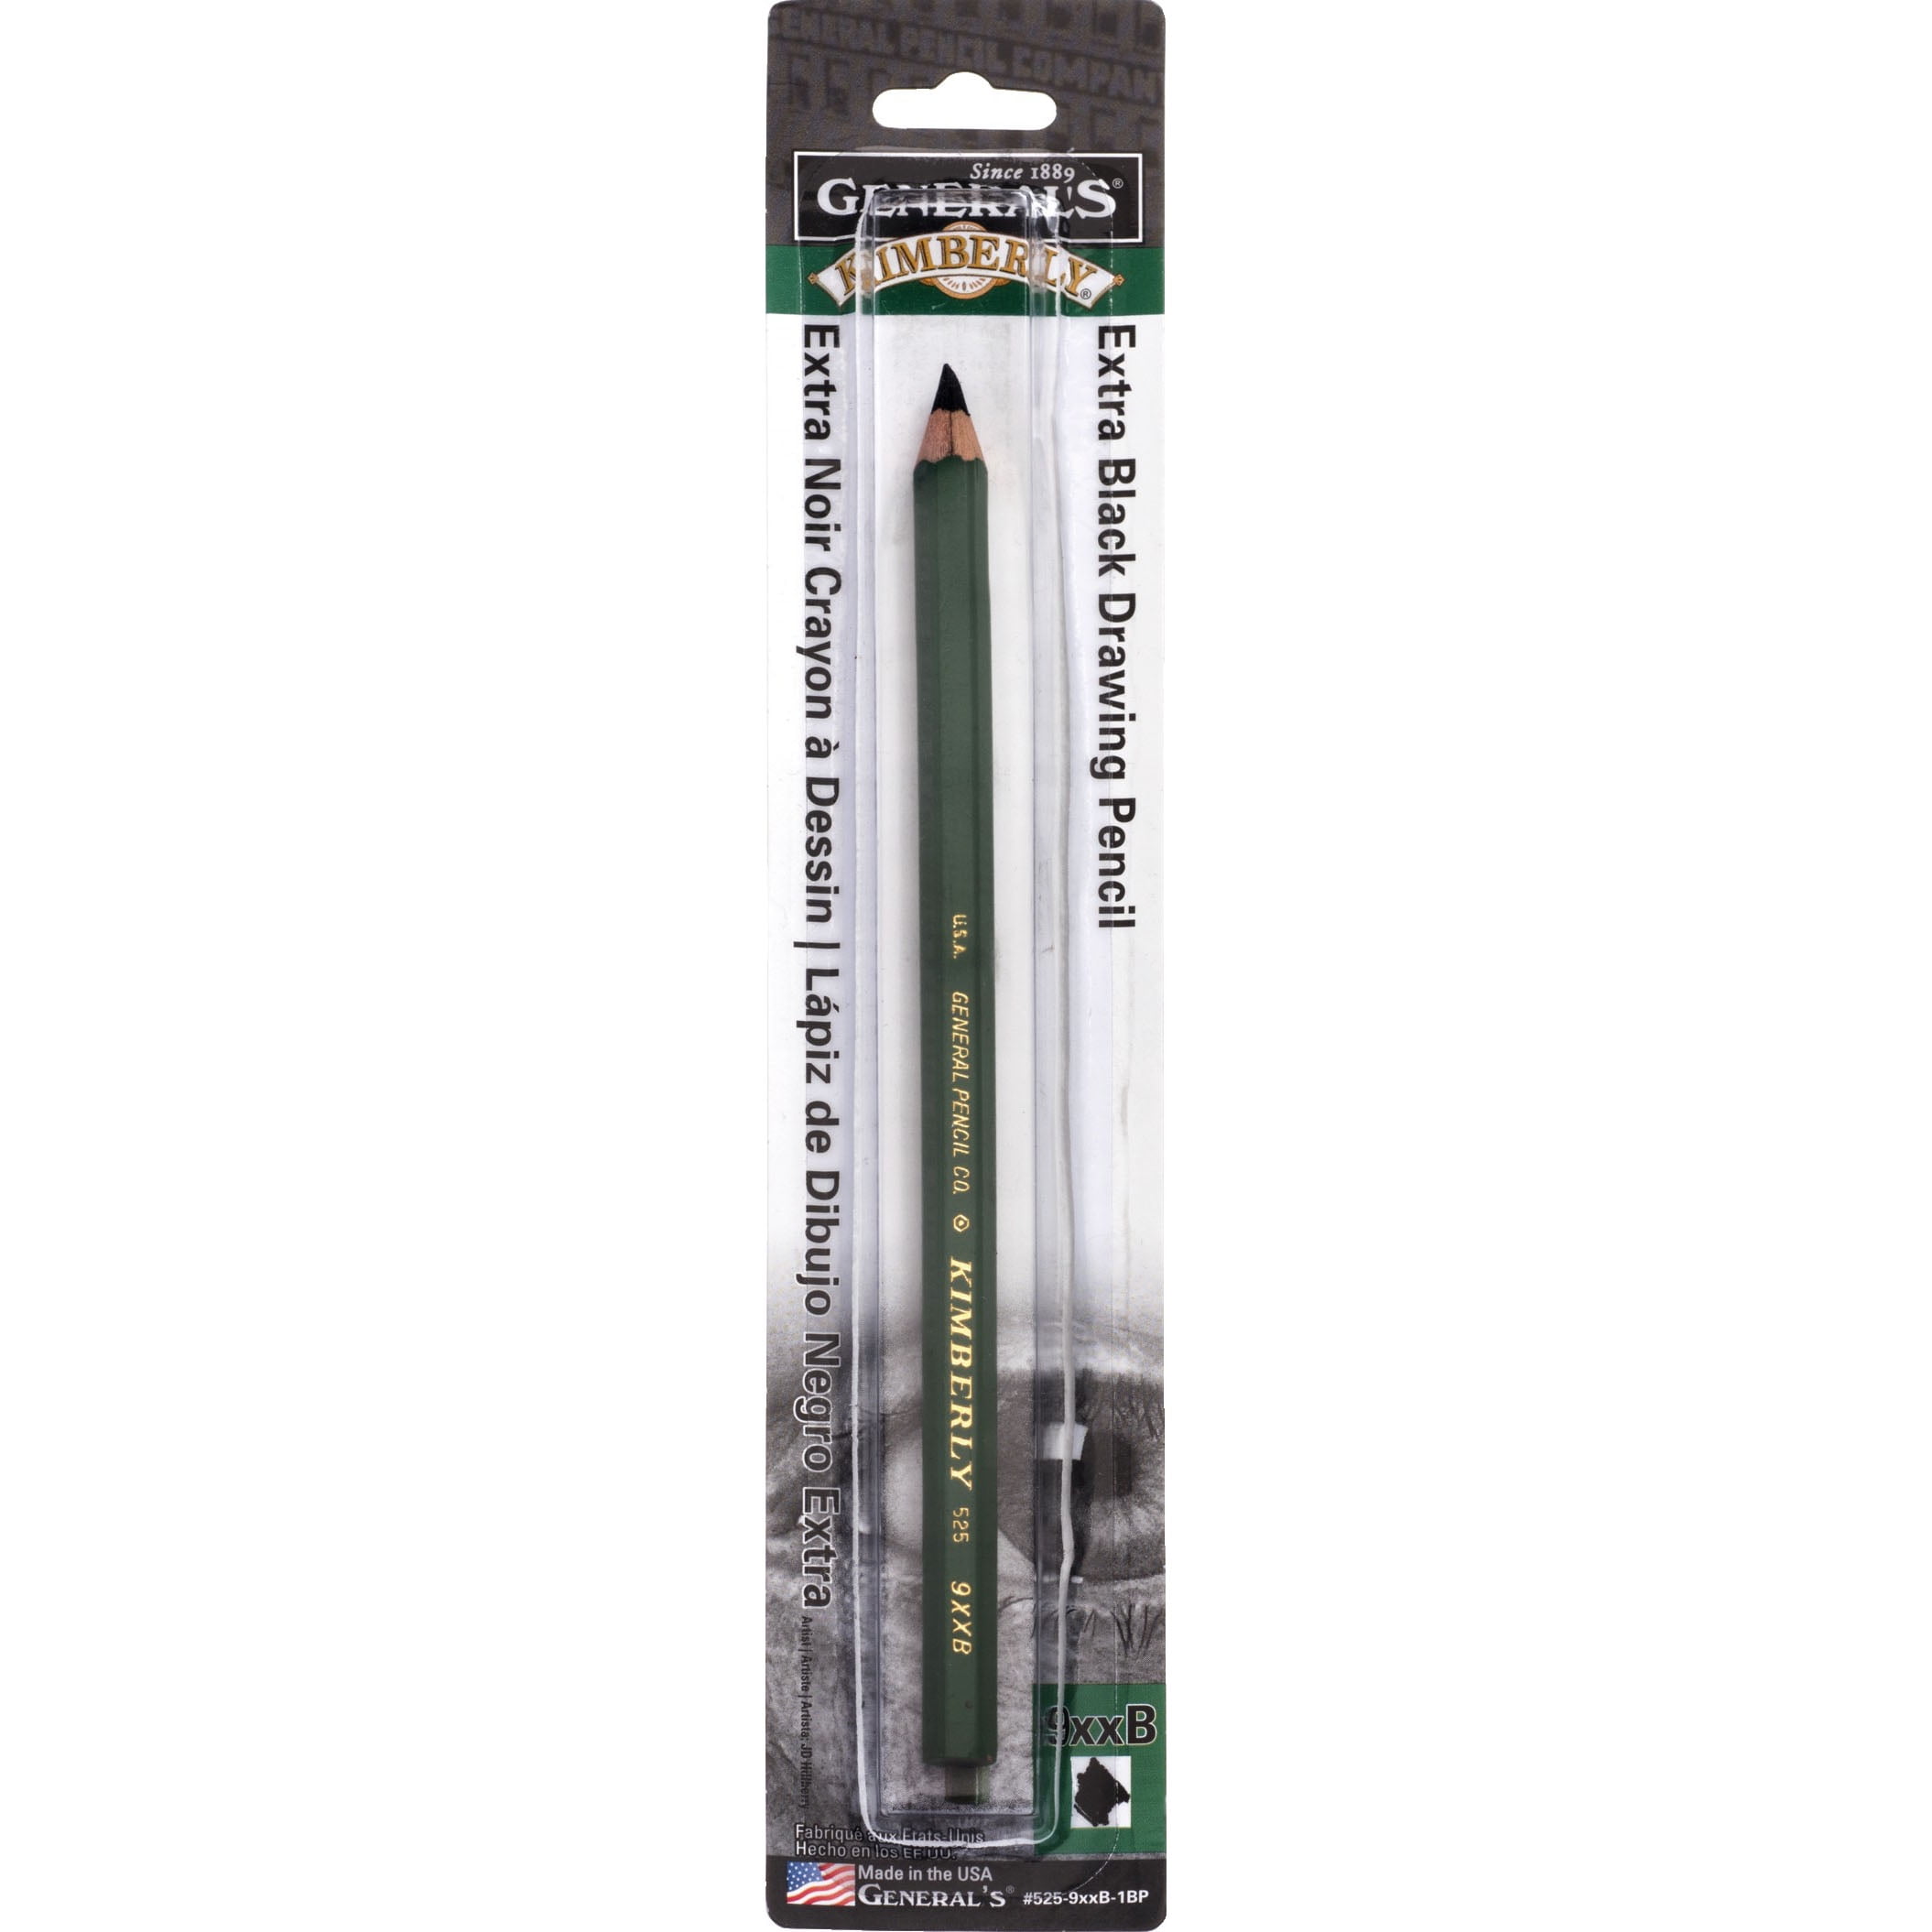 Drawing Pencils from J.D. Hillberry